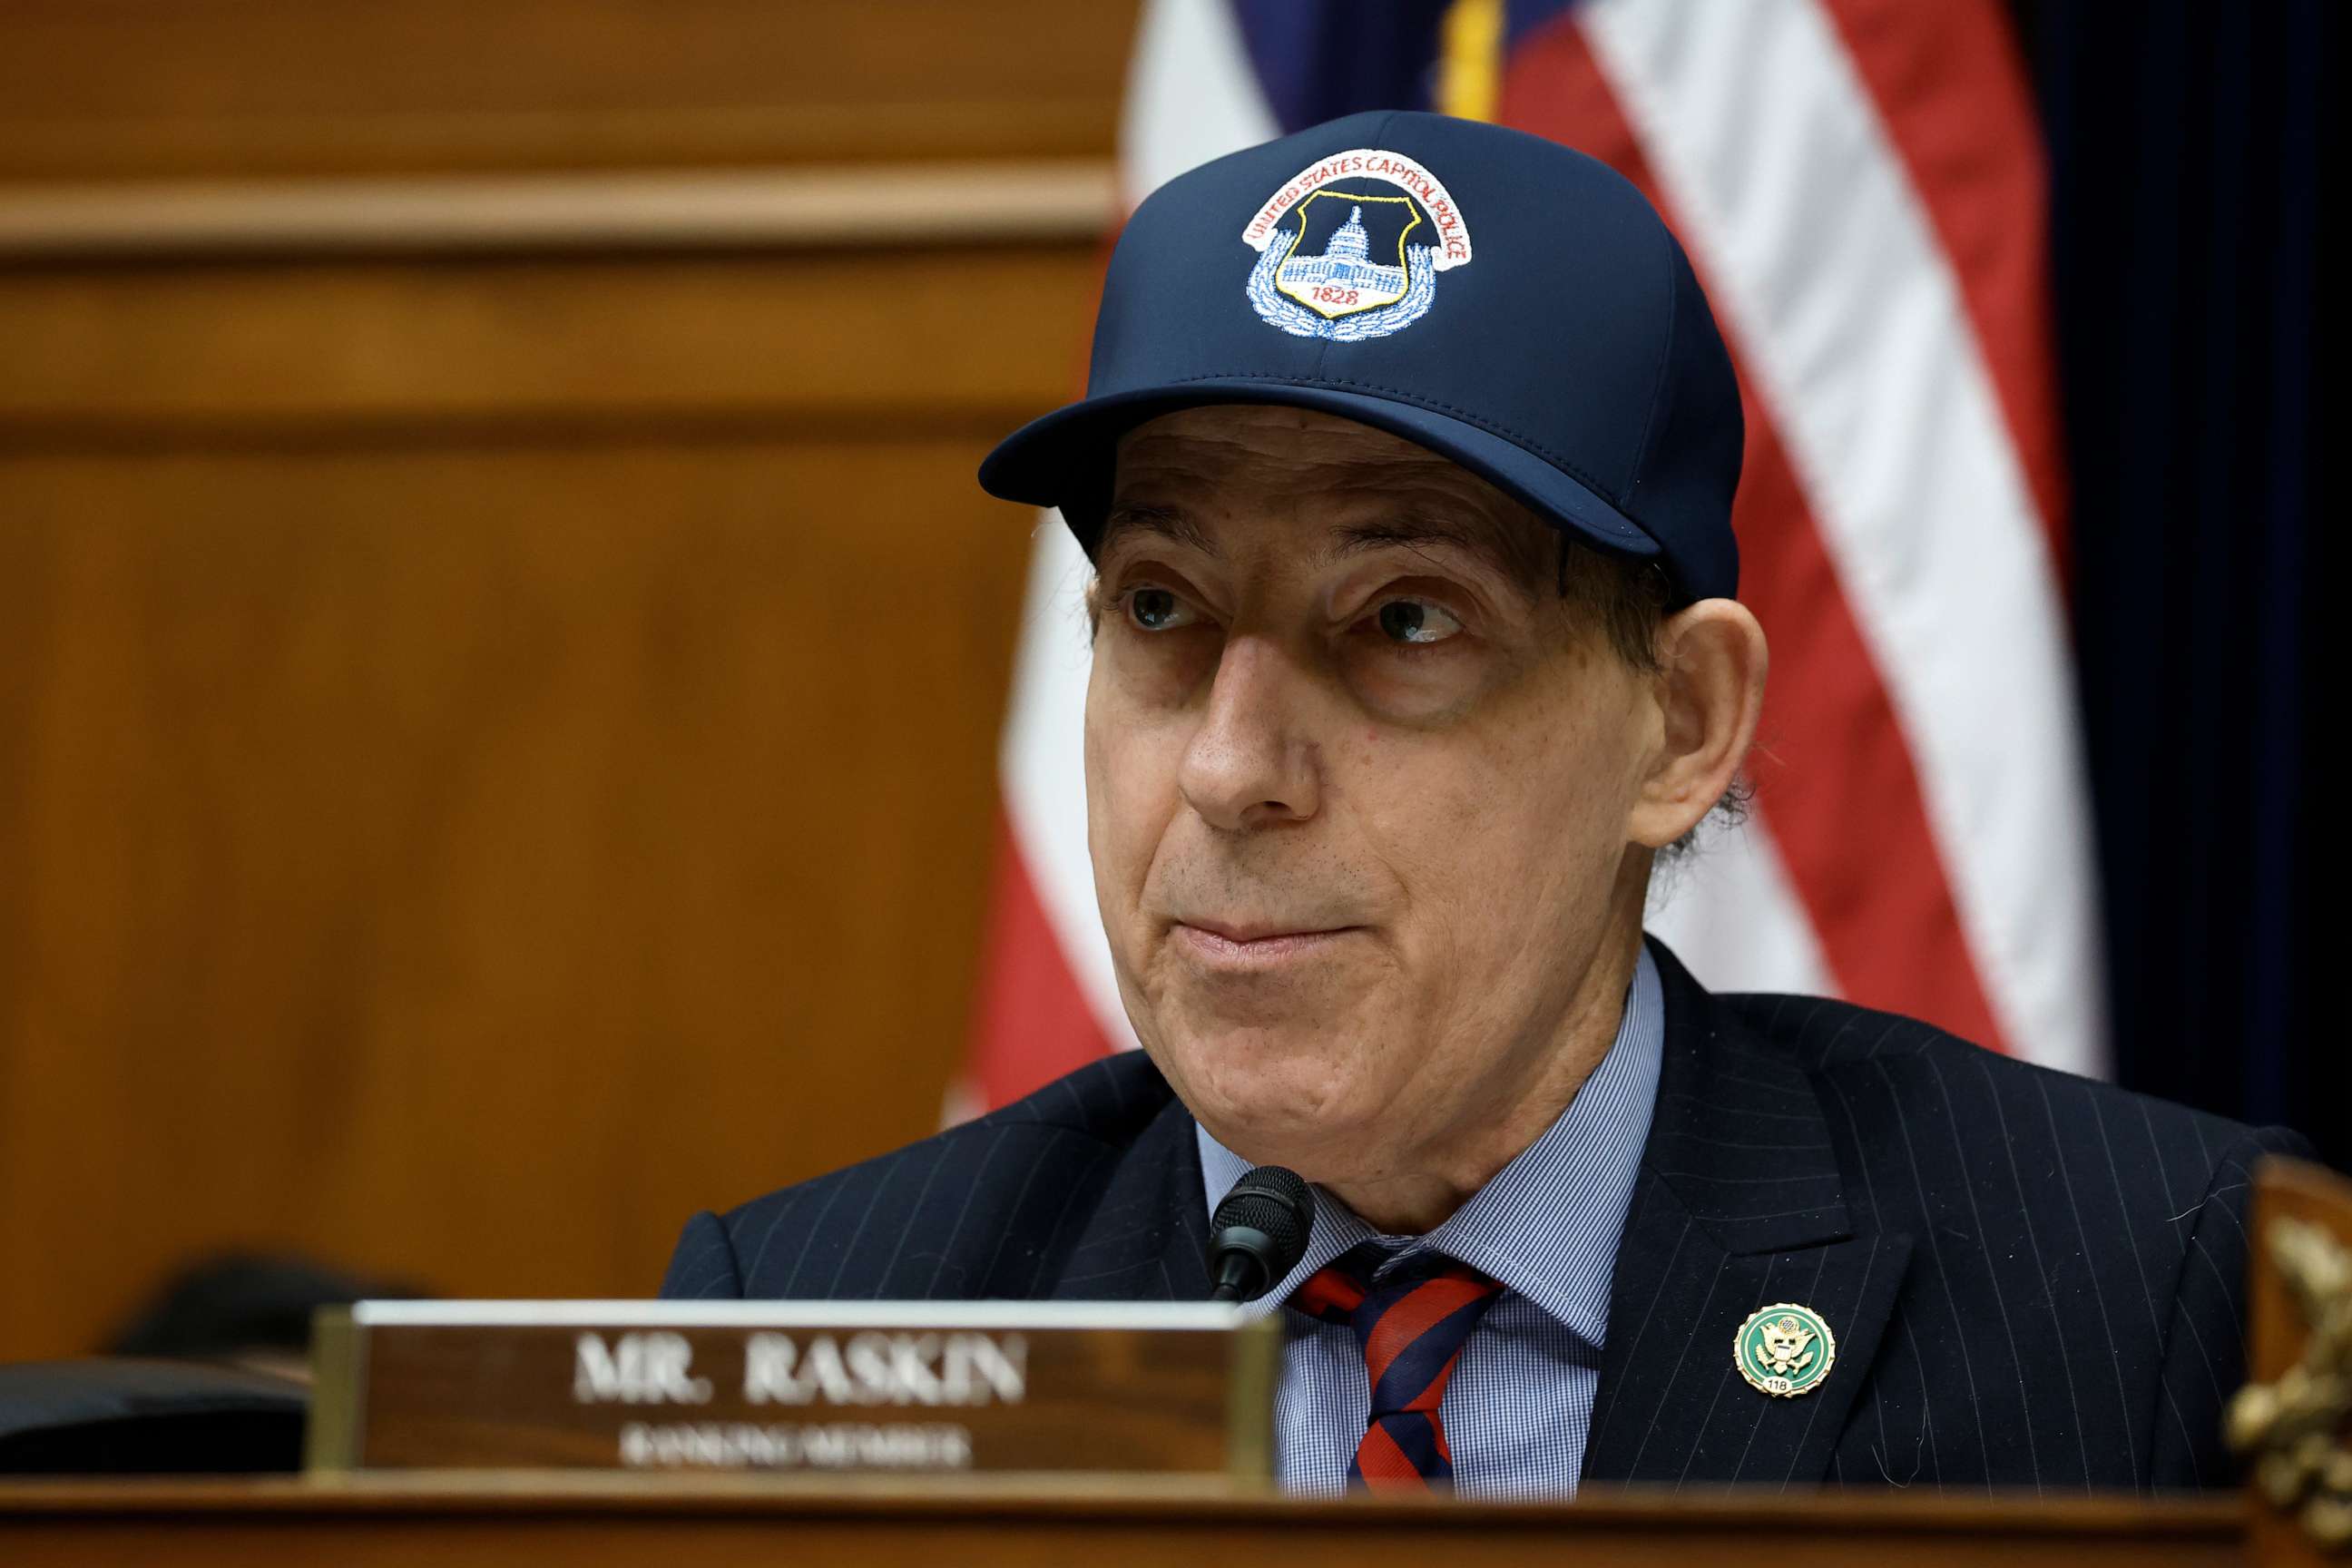 PHOTO: Rep. Jamie Raskin delivers remarks during a hearing in the Rayburn House Office Building on Feb. 1, 2023 in Washington, DC.